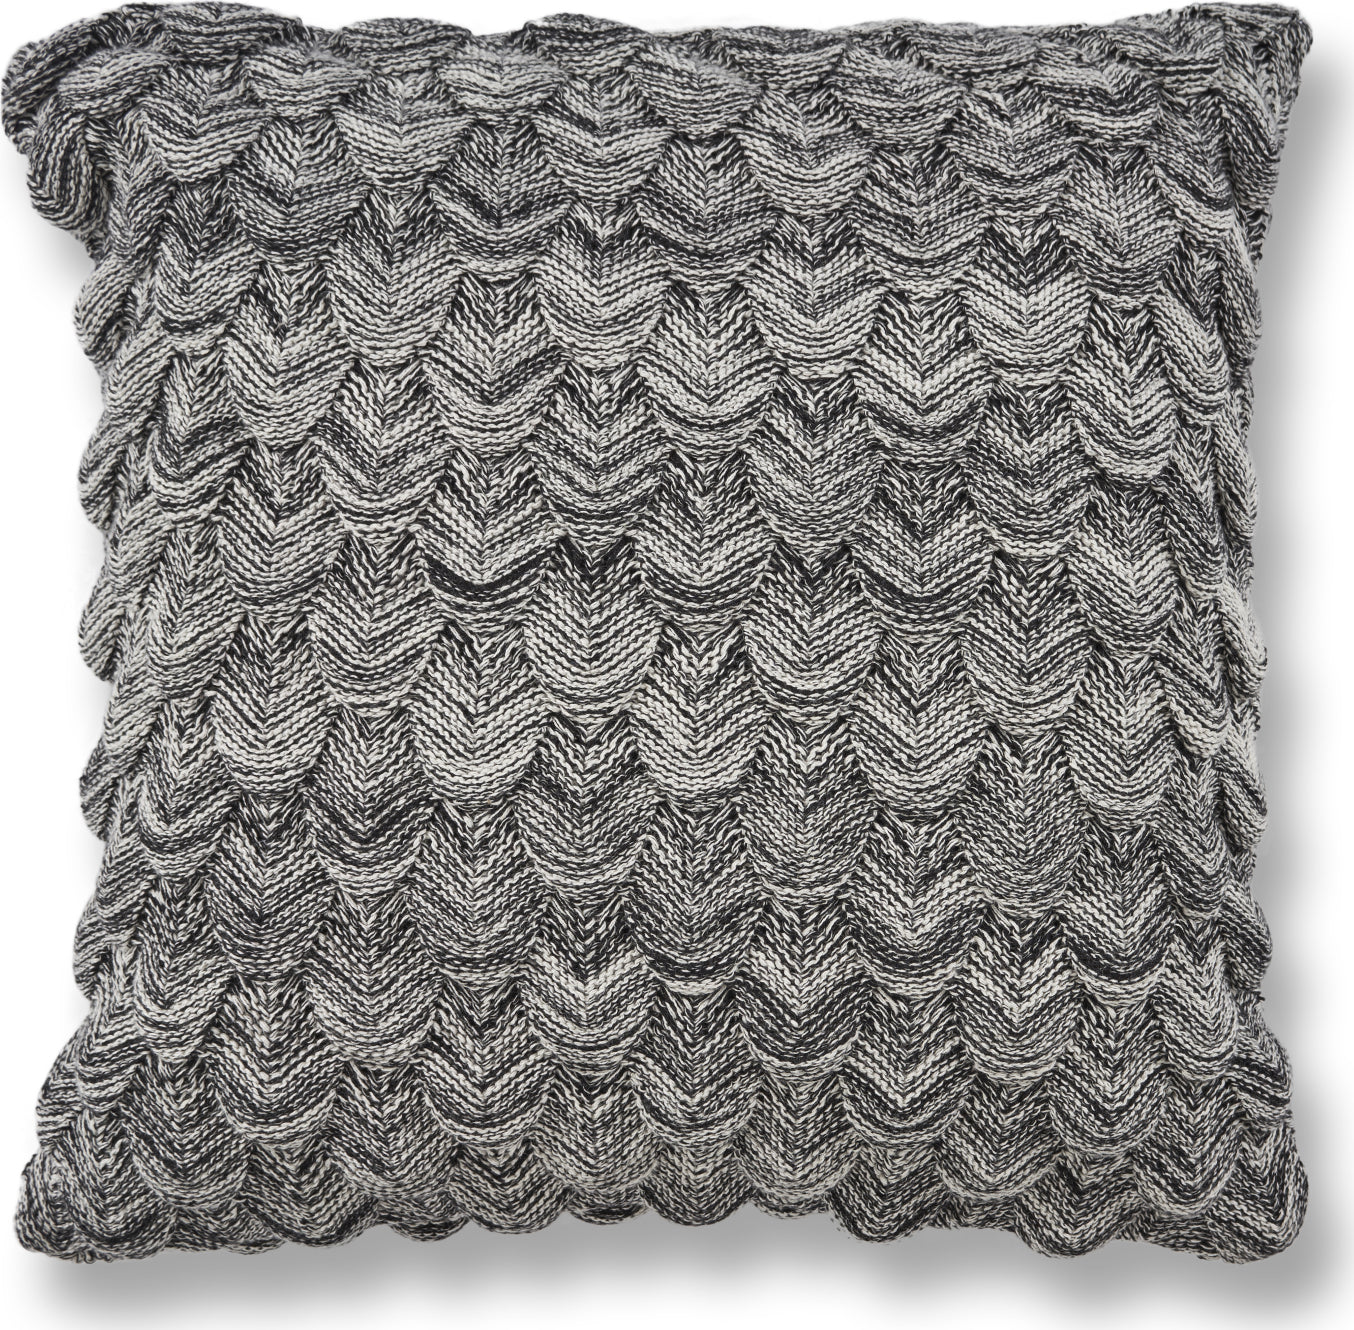 KAS Pillow L341 Black and White Knit main image